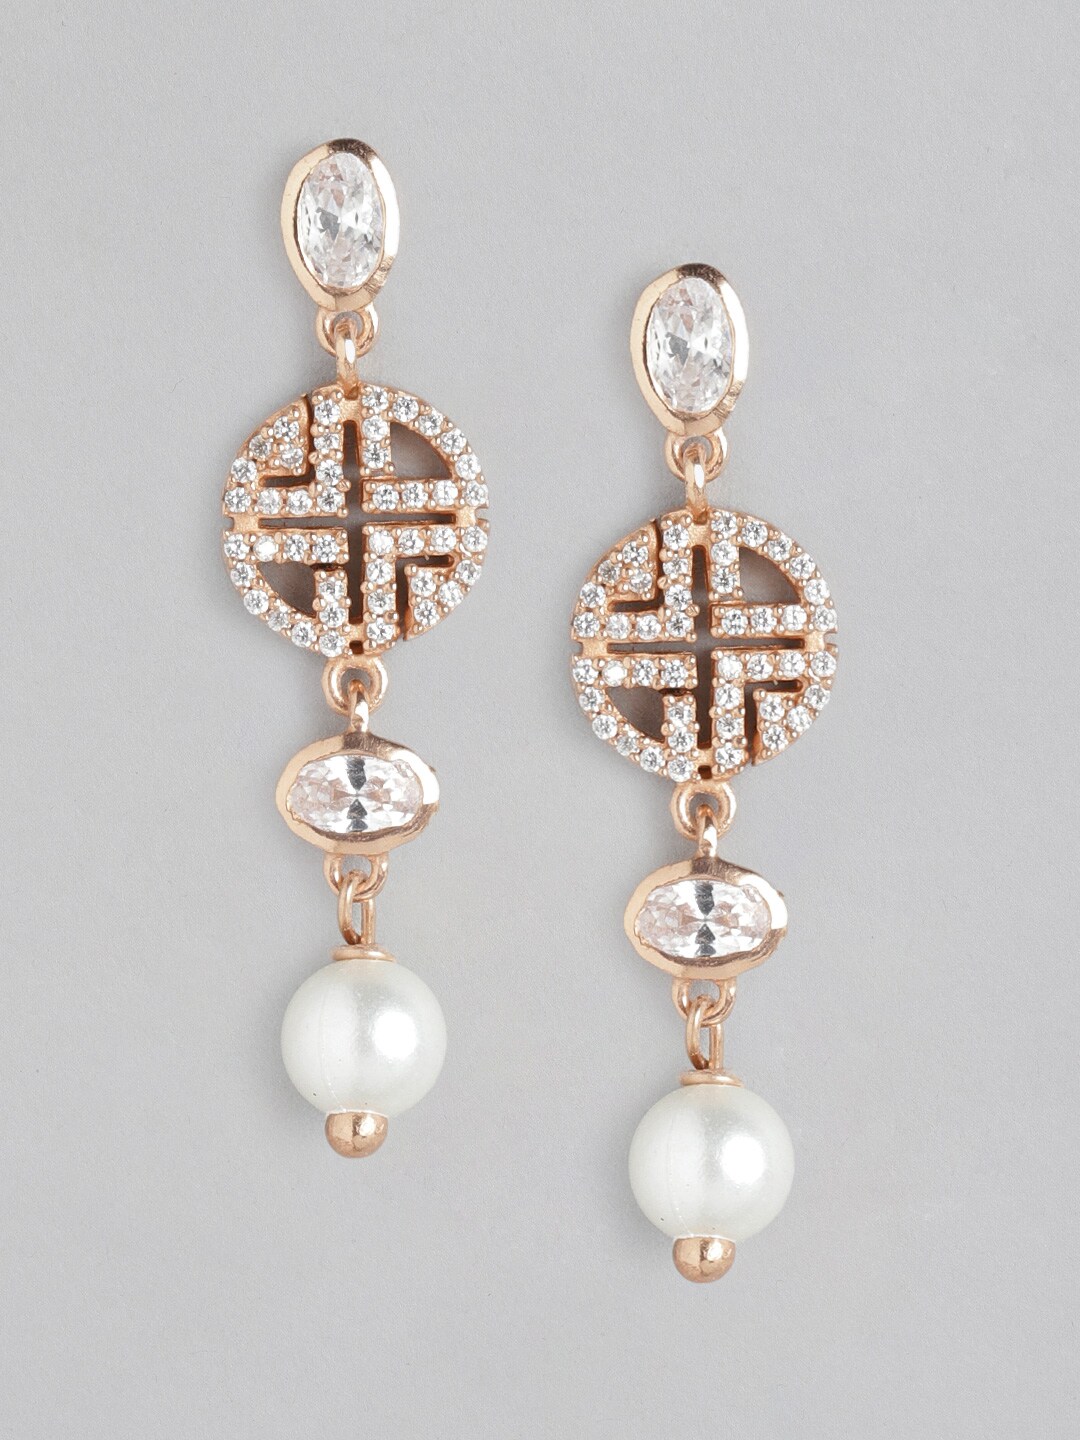 Carlton London White Rose Gold-Plated CZ Studded & Beaded Contemporary Drop Earrings Price in India